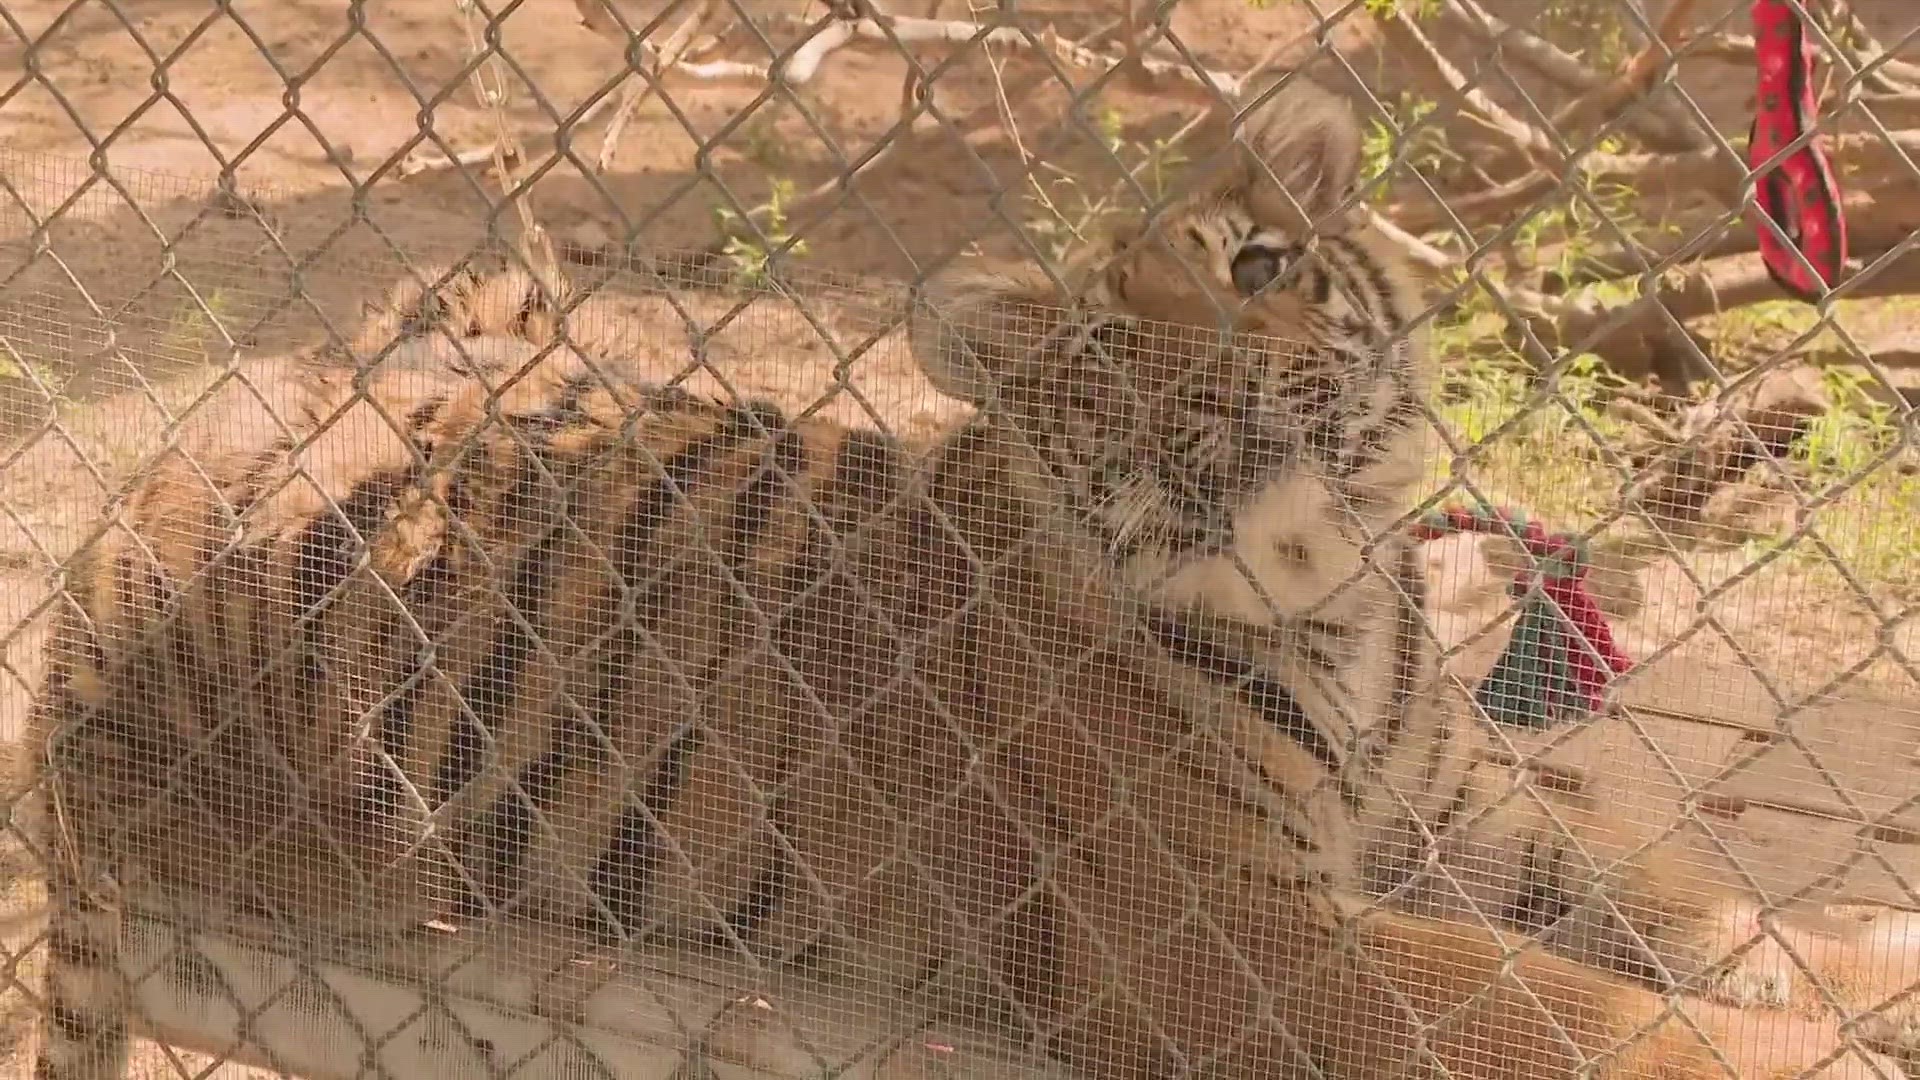 A tiger cub was recently recovered by authorities in a sting operation in Arizona. See how the cub is doing at a Scottsdale sanctuary.